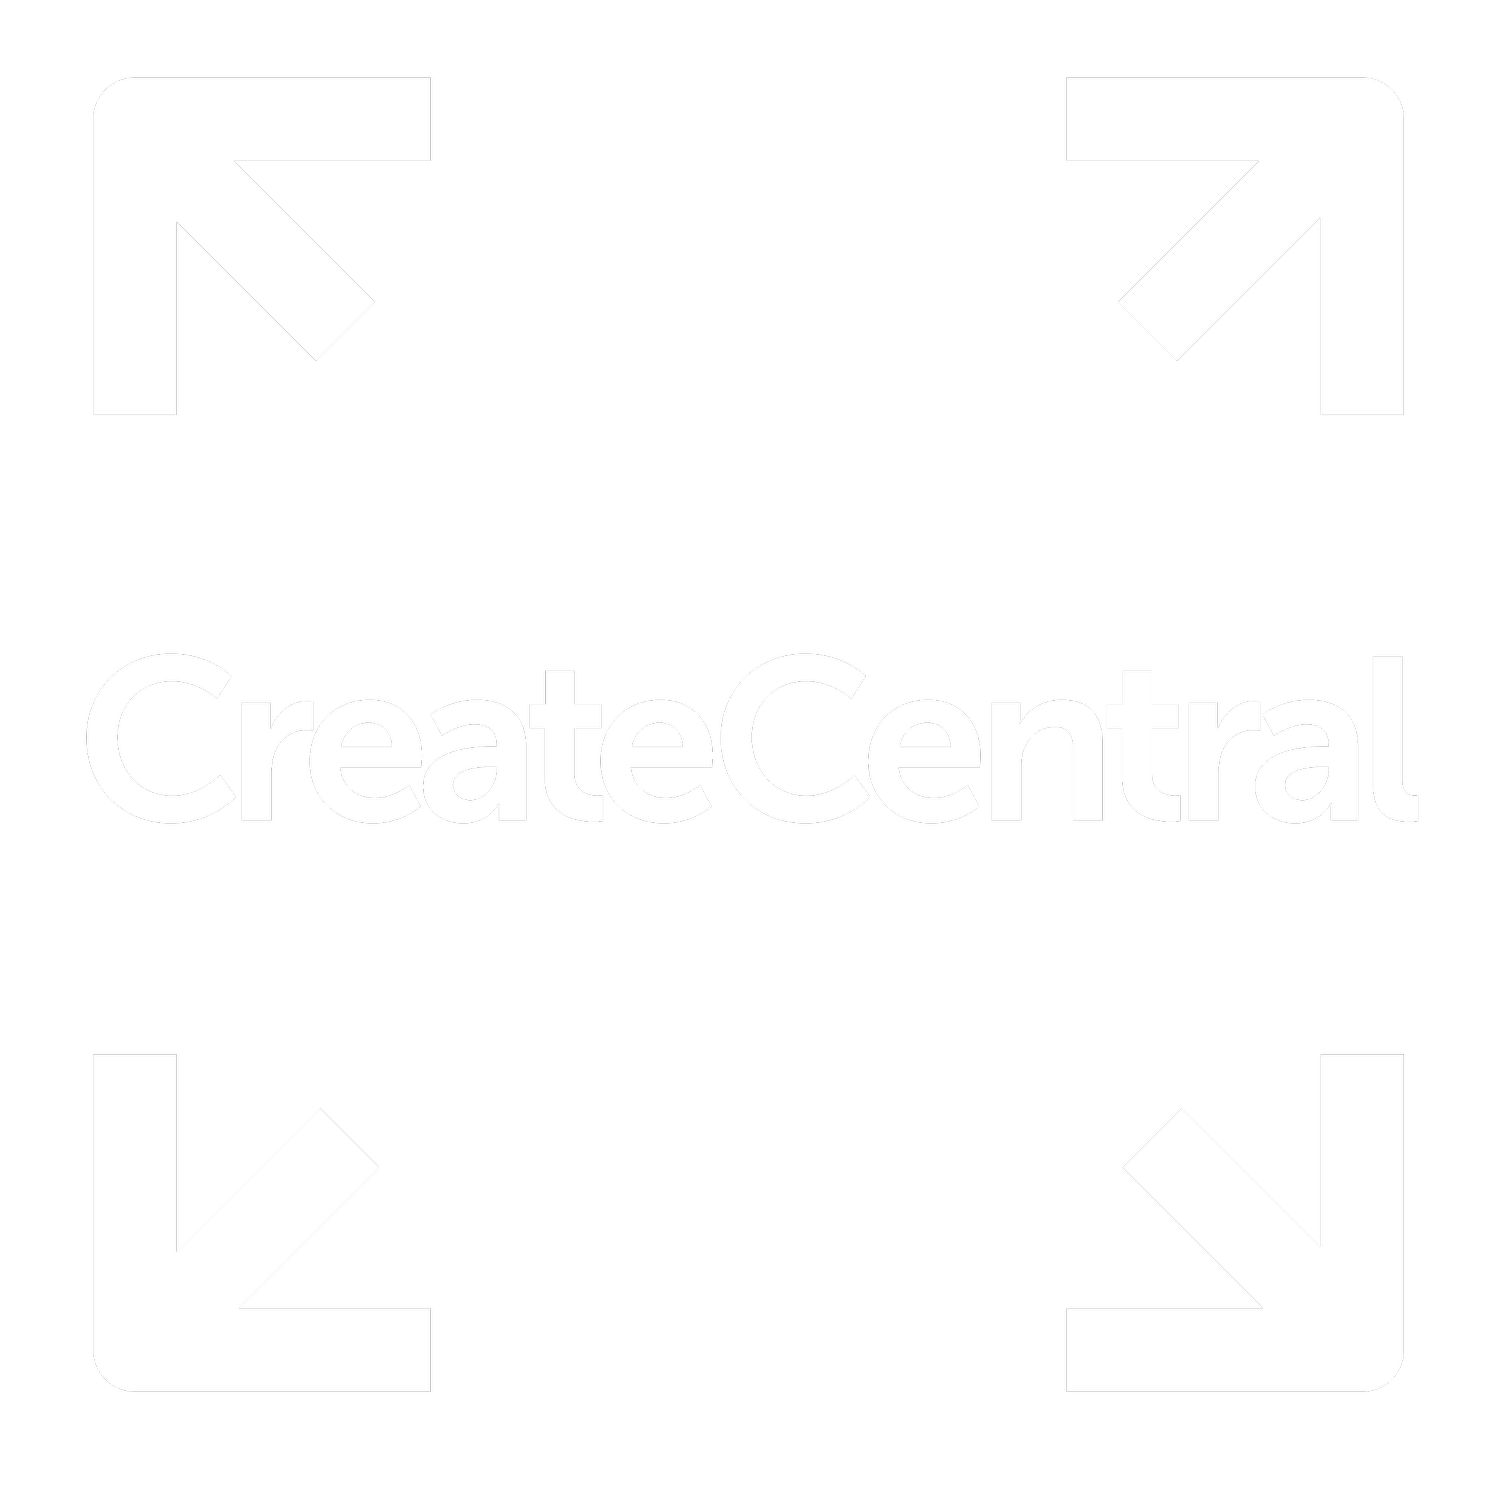 Create Central | Home of original storytelling